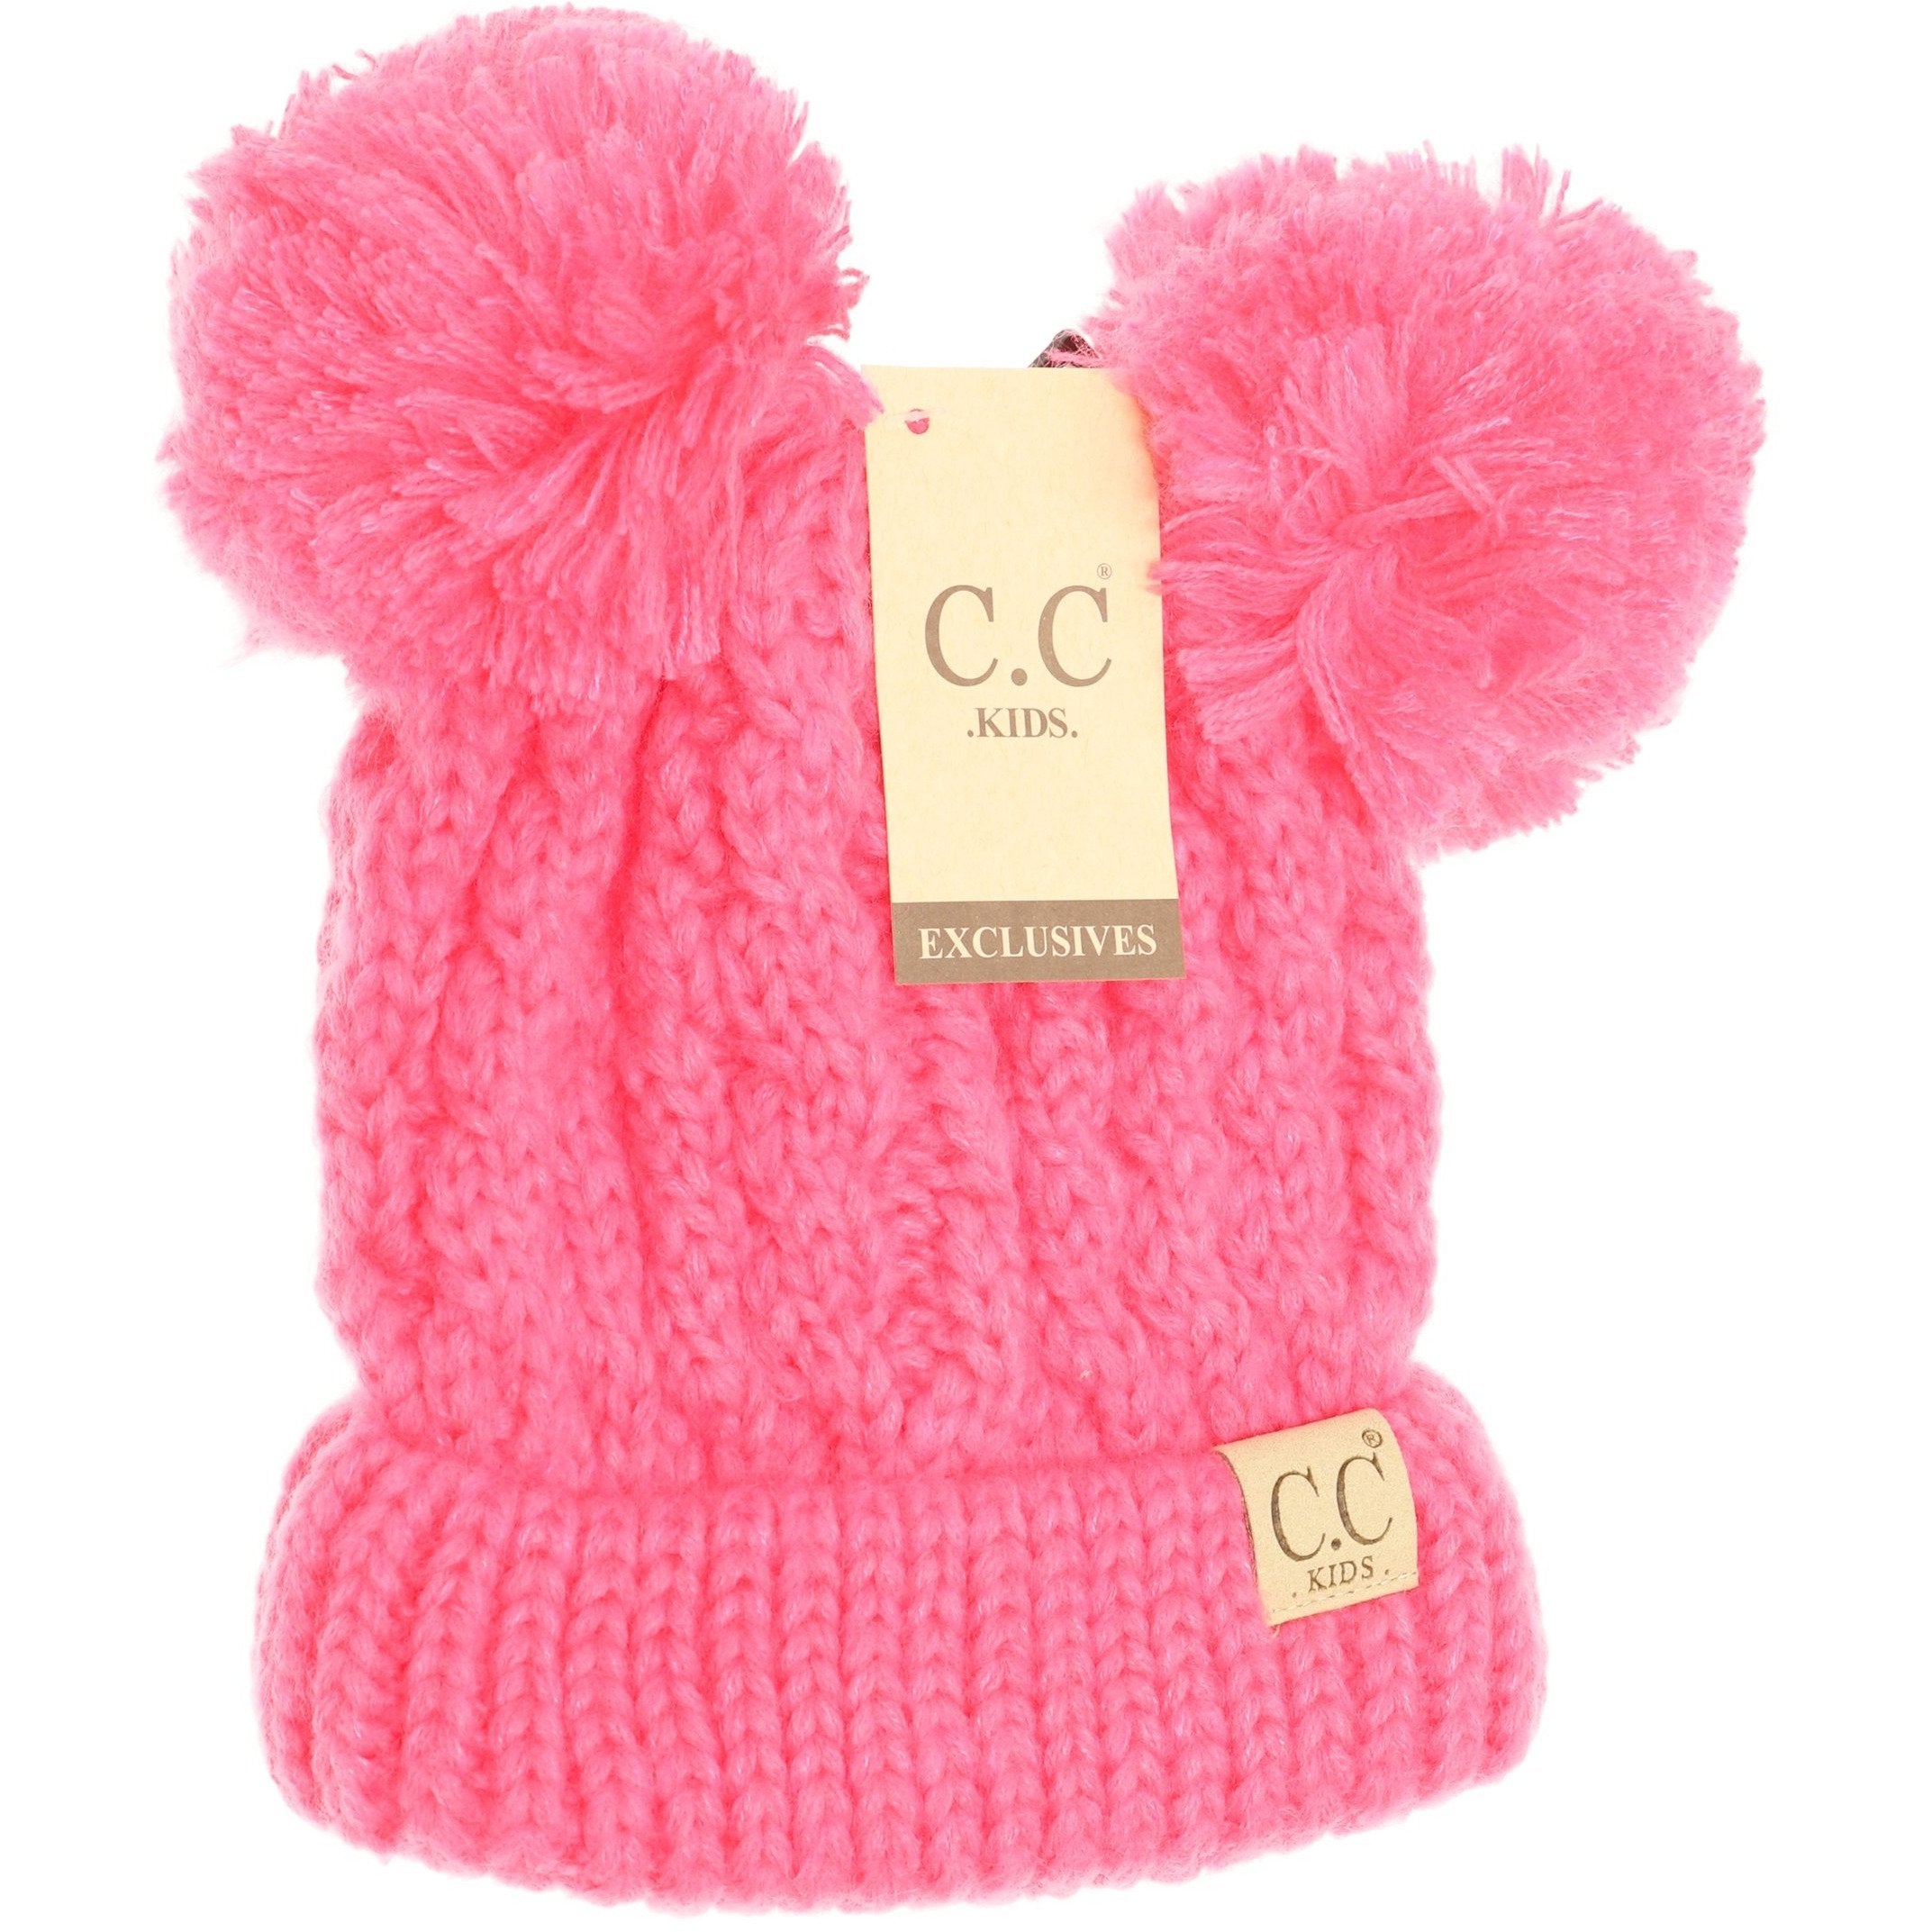 Kids Solid Double Pom CC hat- additional colors  A Touch of Magnolia Boutique New Candy Pink  